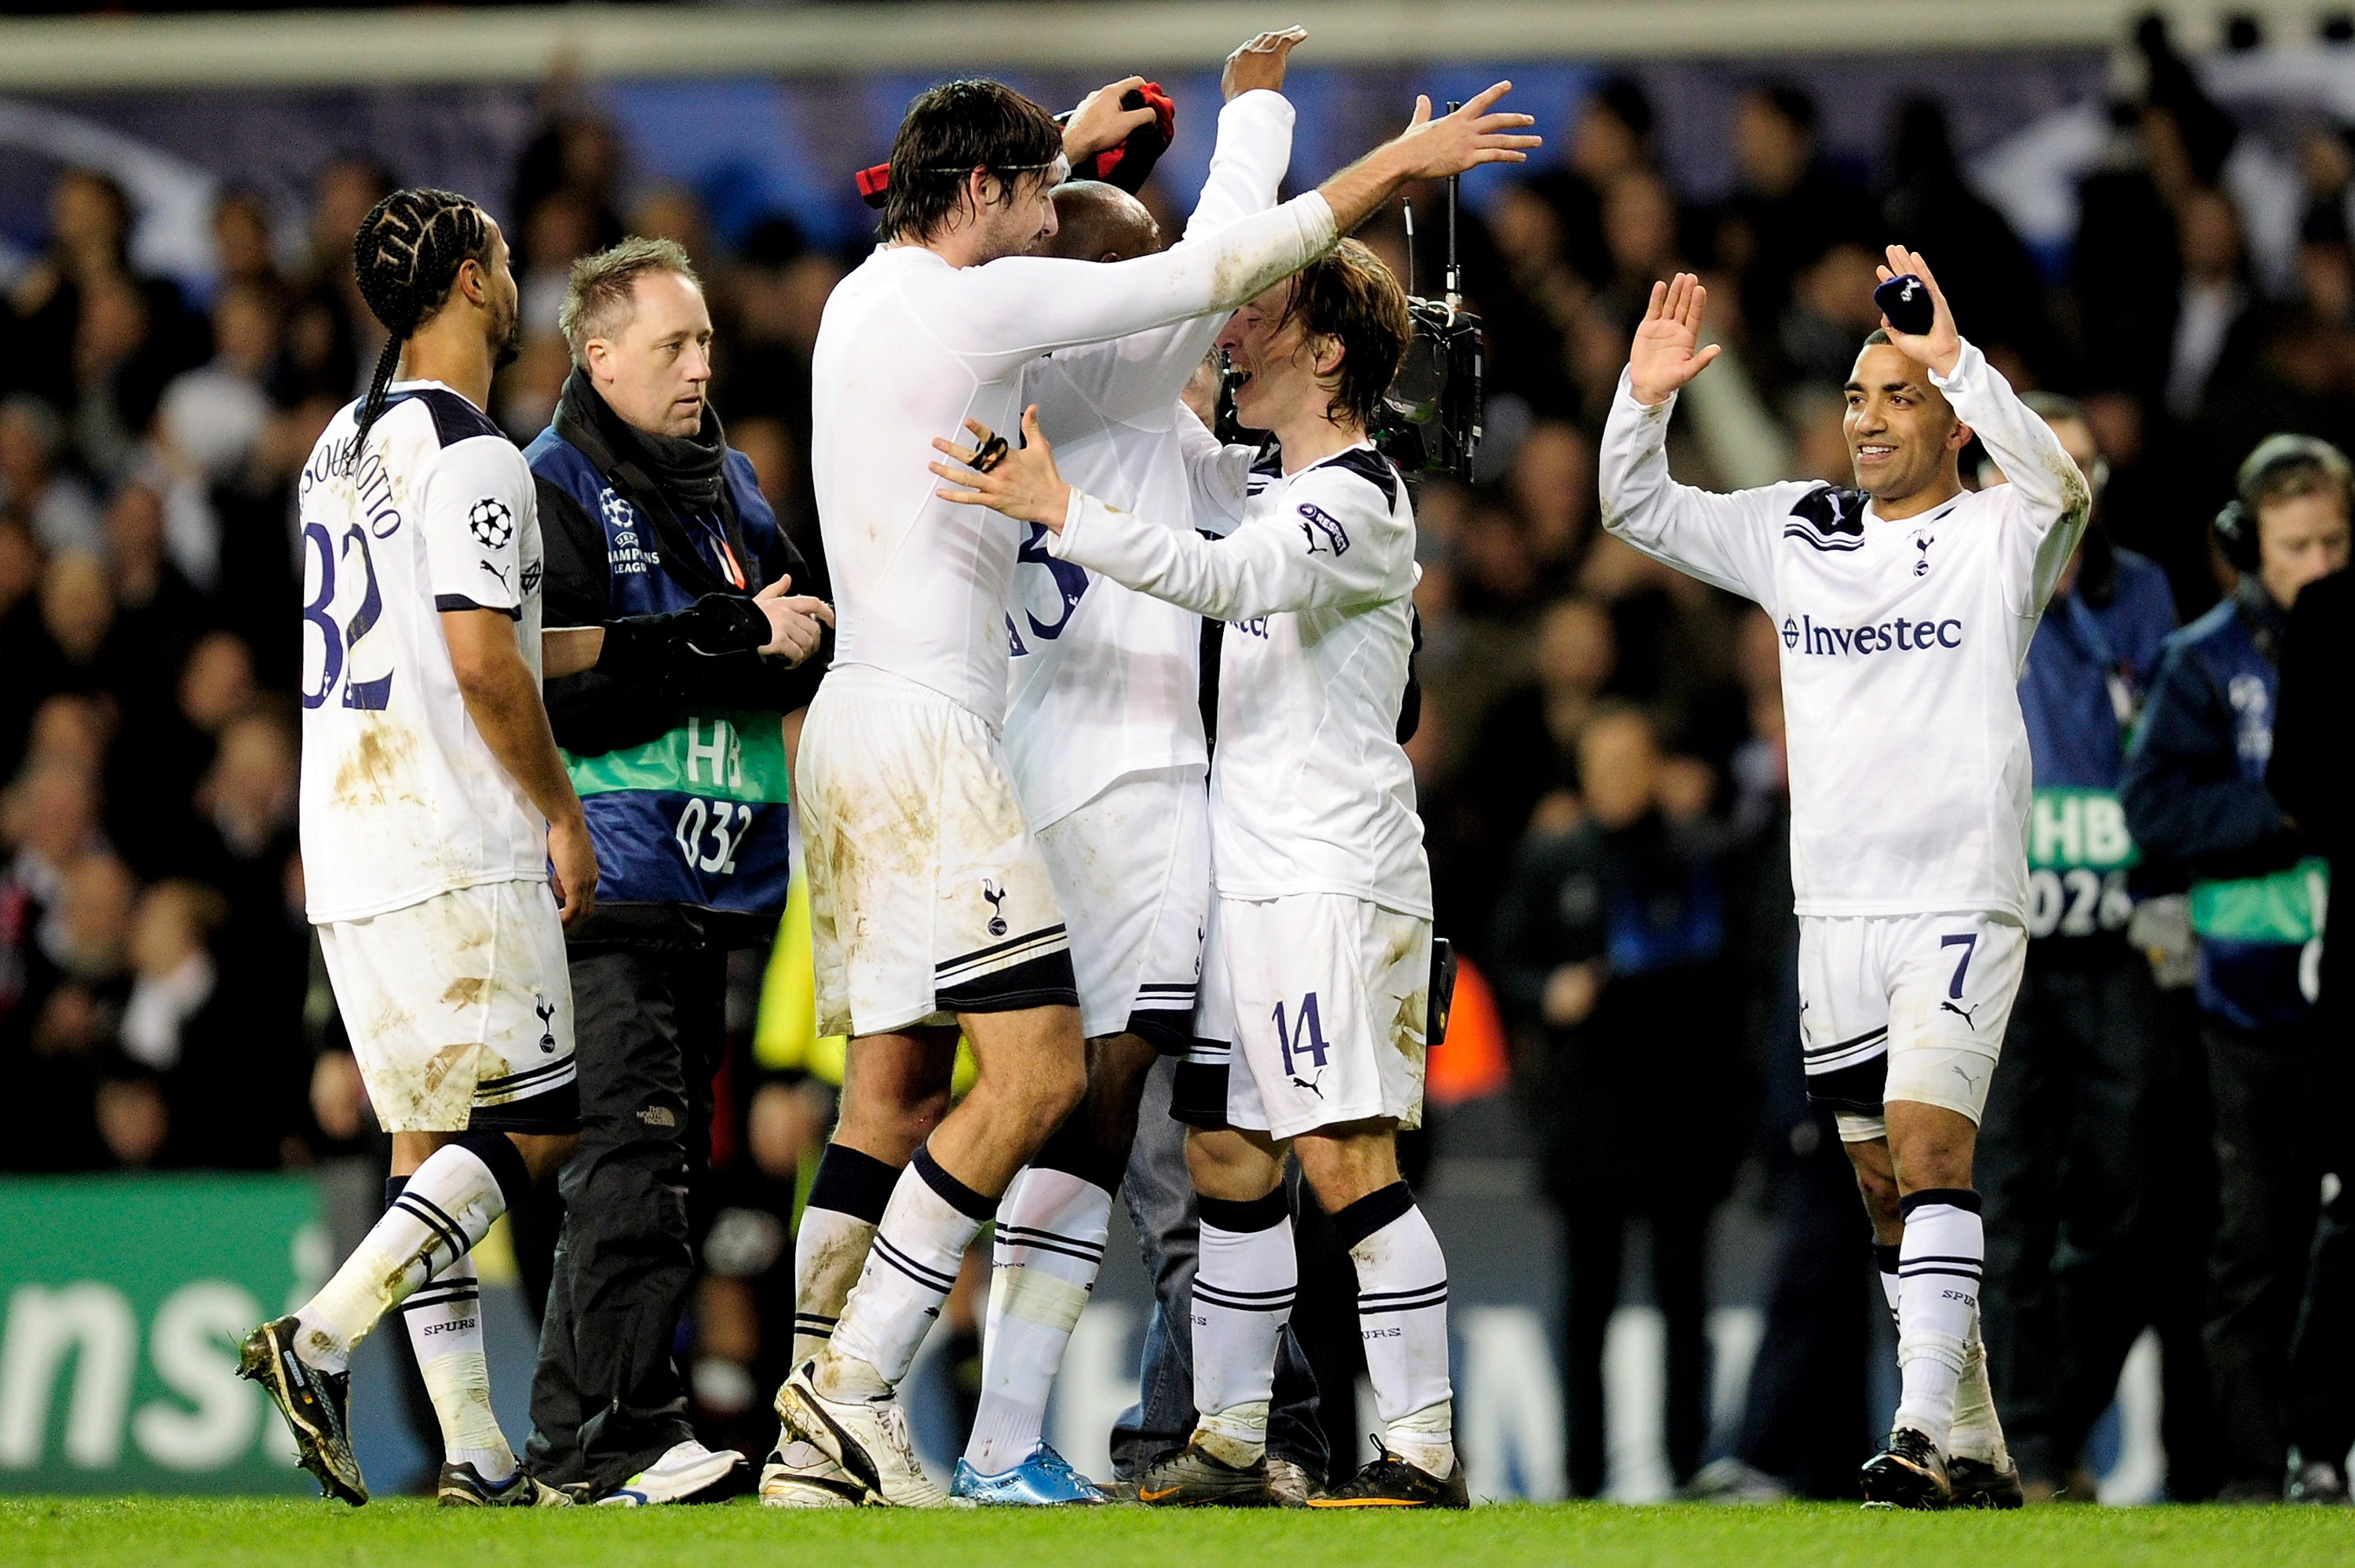 LONDON, ENGLAND - MARCH 09:  Tottenham players celebrate after the UEFA Champions League round of 16 second leg match between Tottenham Hotspur and AC Milan at White Hart Lane on March 9, 2011 in London, England.  (Photo by Jamie McDonald/Getty Images)